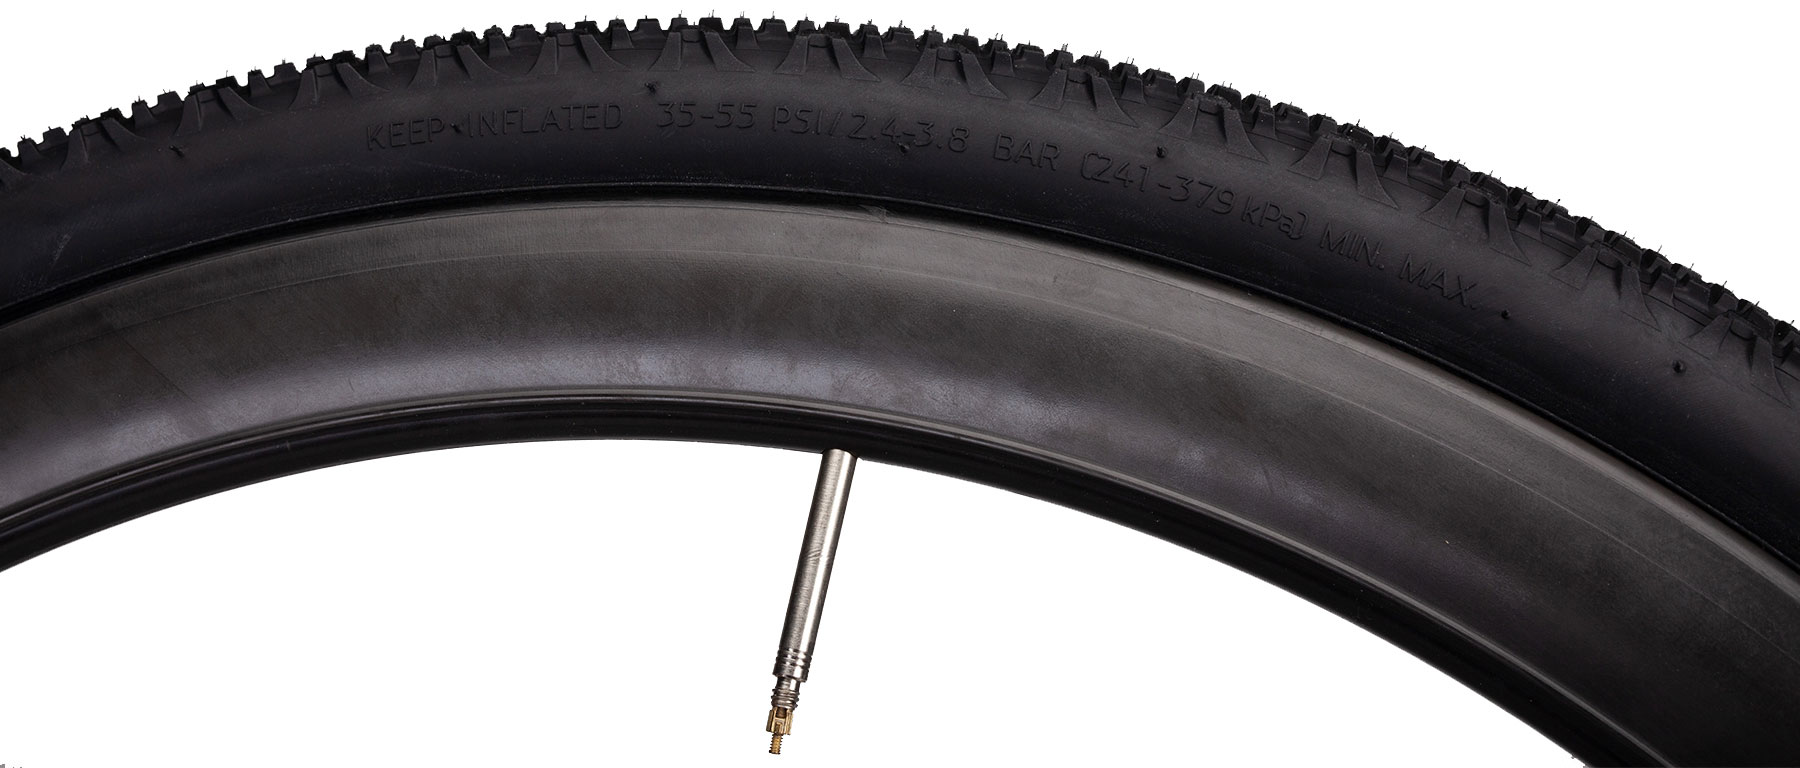 Donnelly EMP Tubeless Gravel Tire